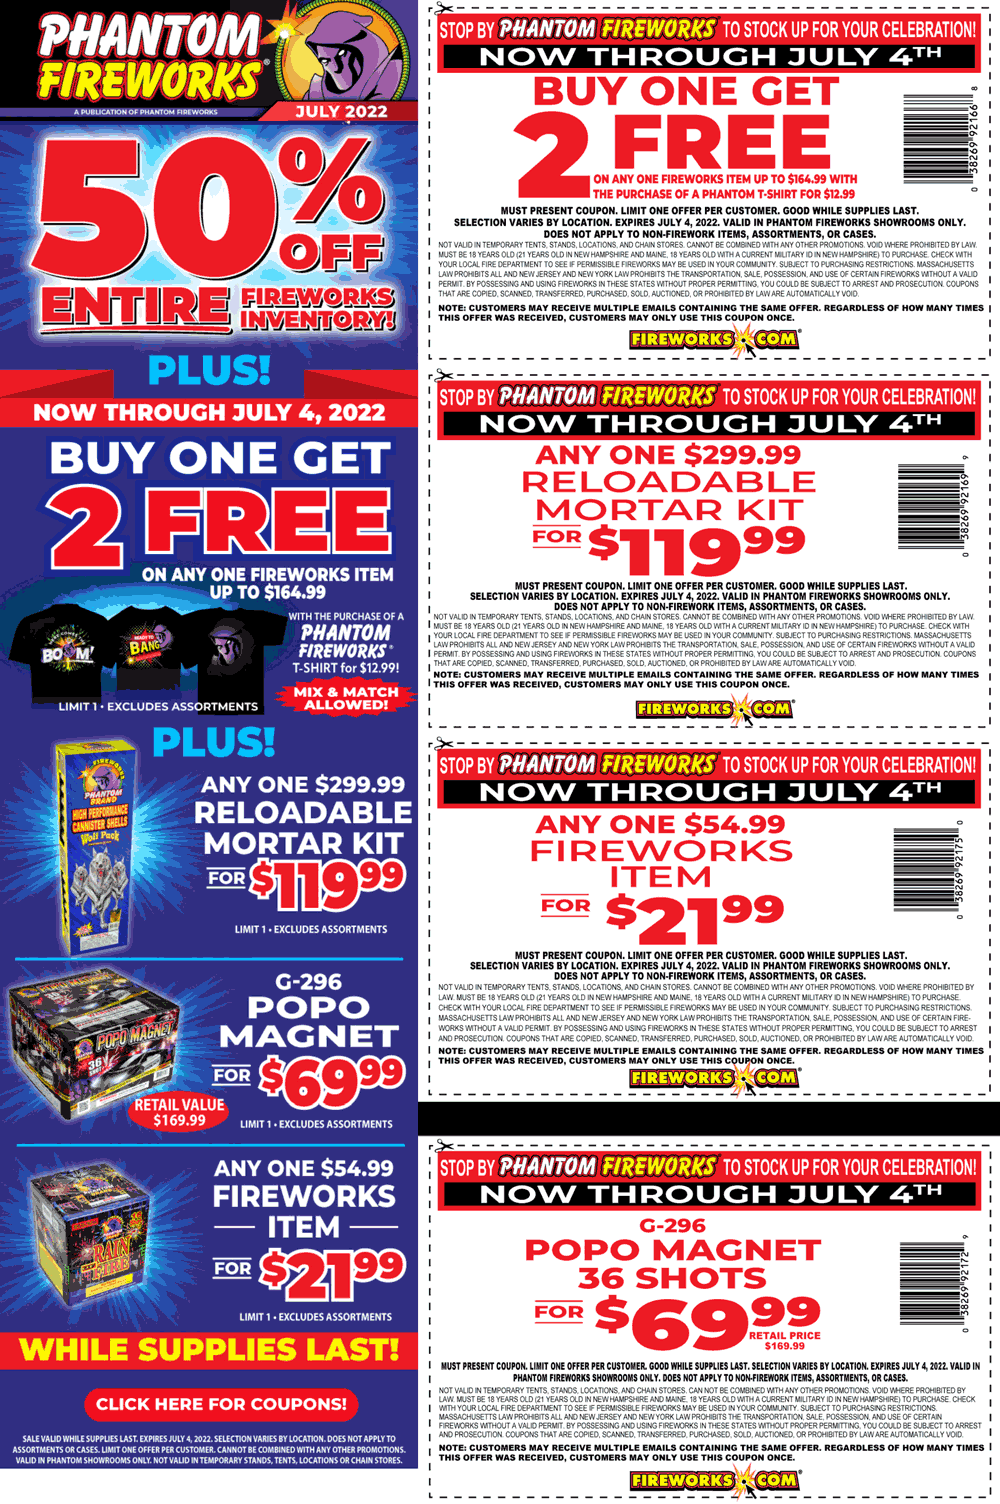 Phantom Fireworks stores Coupon  50% off everything today at Phantom Fireworks #phantomfireworks 